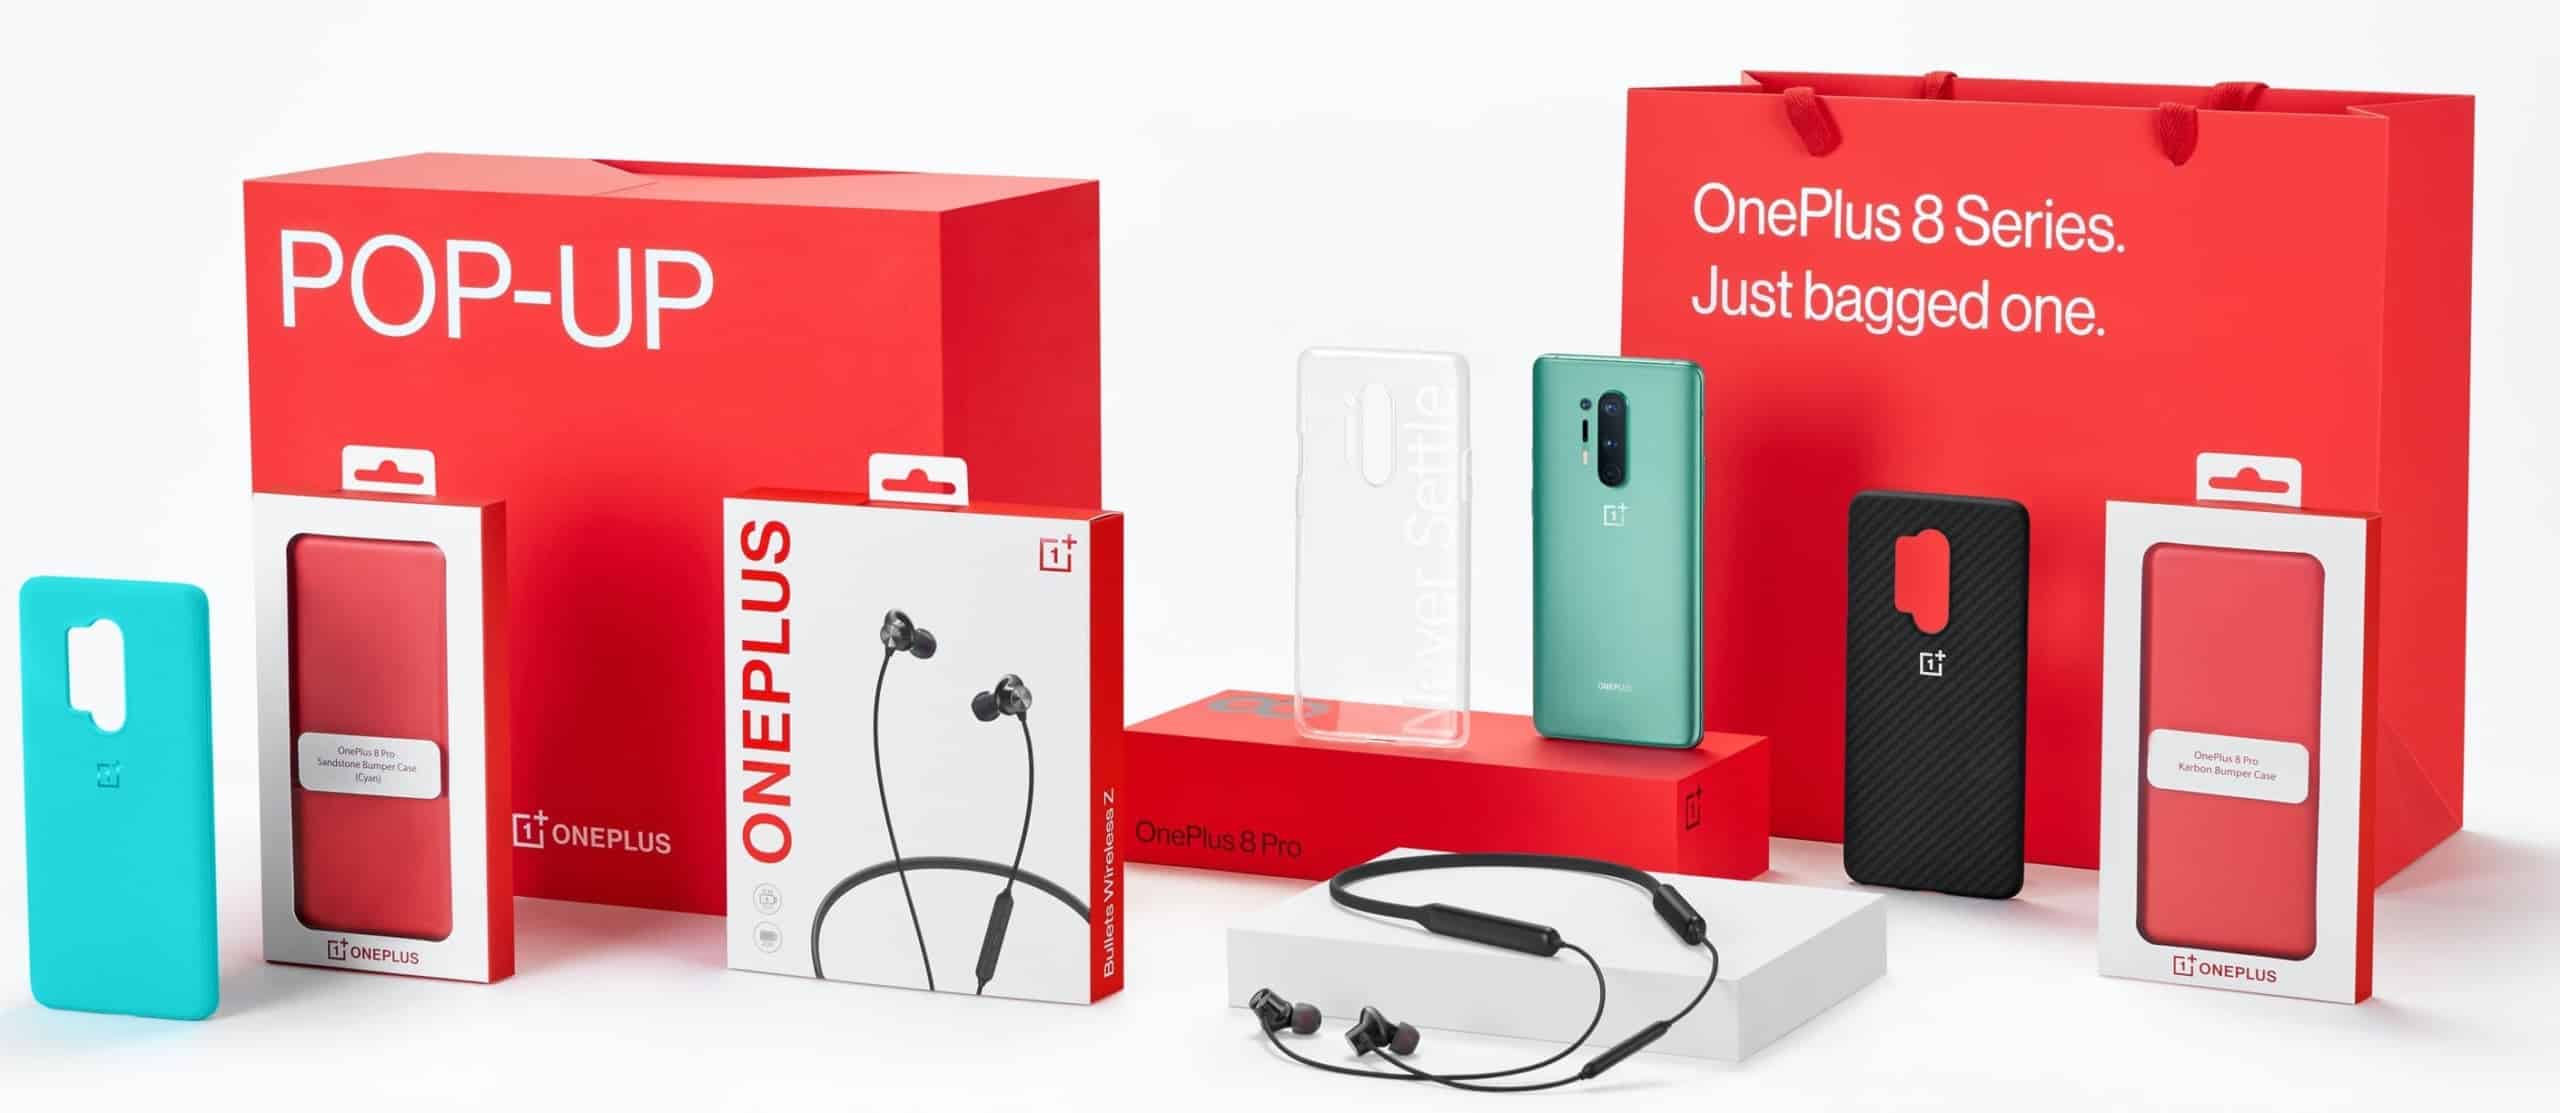 OnePlus 8 Pro package box